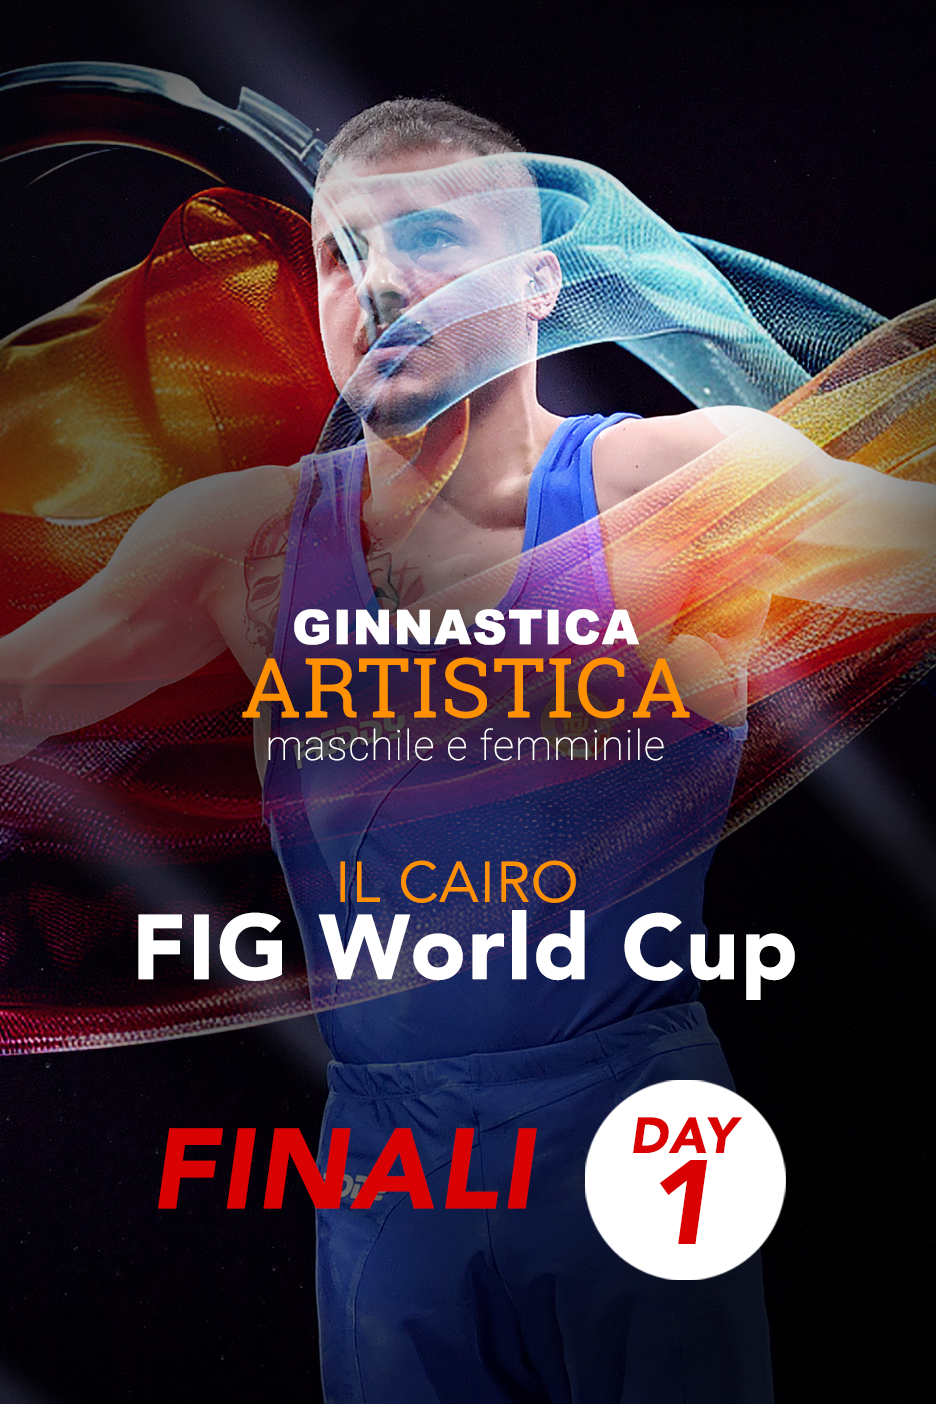 FIG World Cup - Finali Day 1